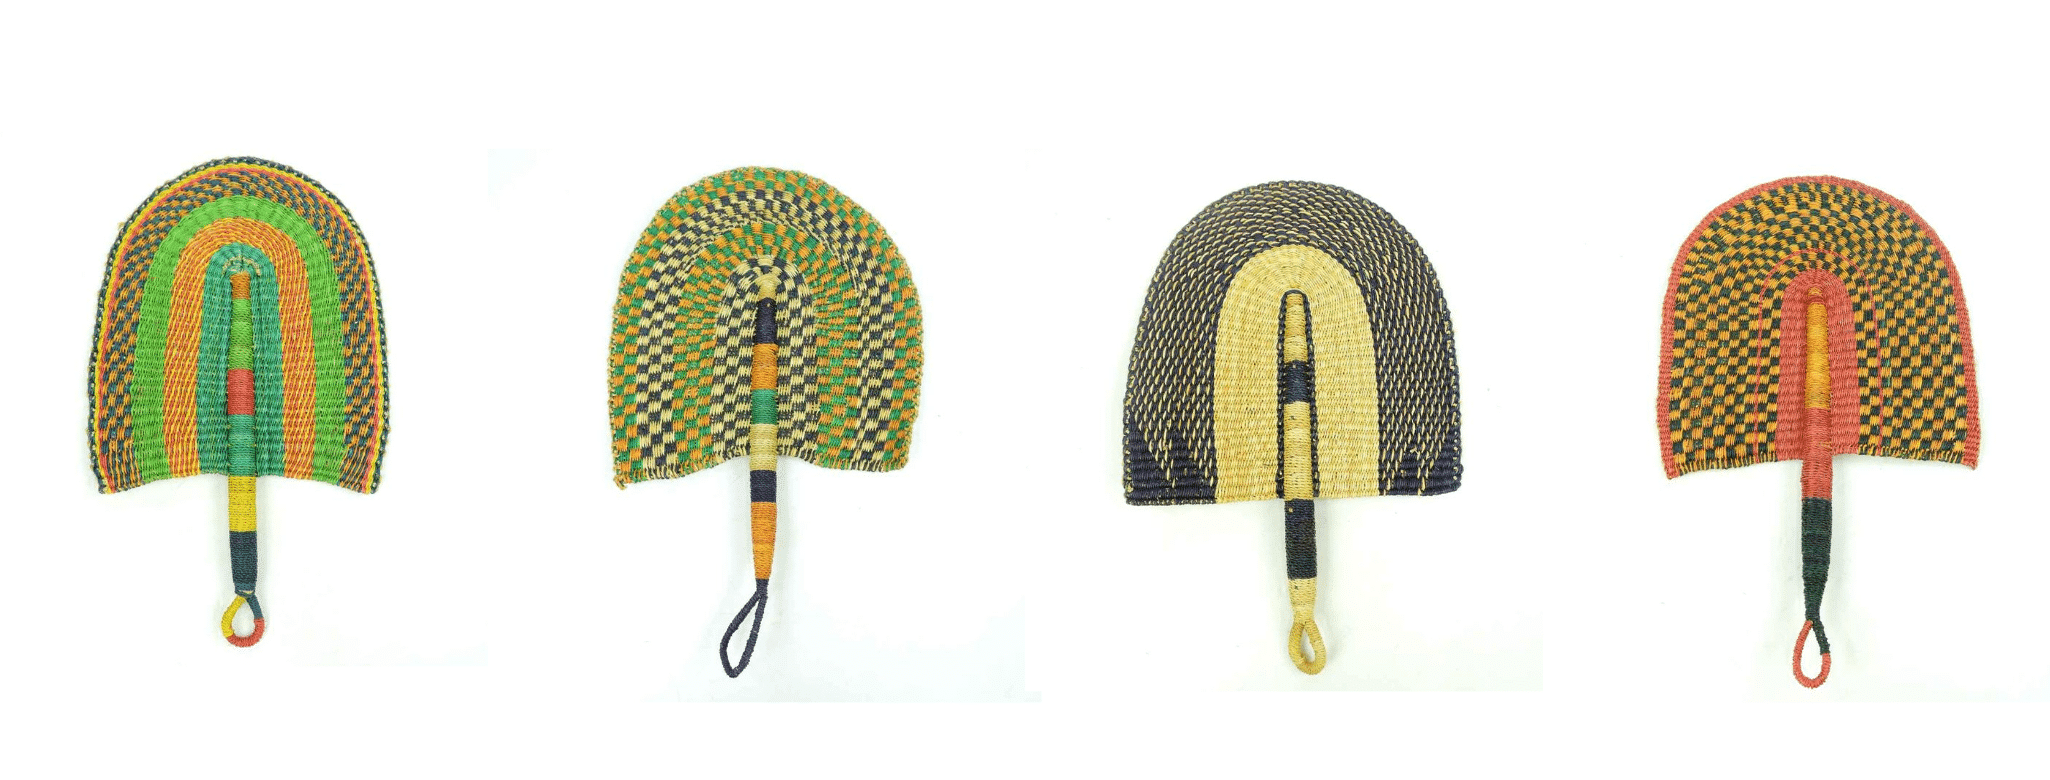 Our Bolga Fans are hand-woven from the elephant grass in Ghana, West Africa.